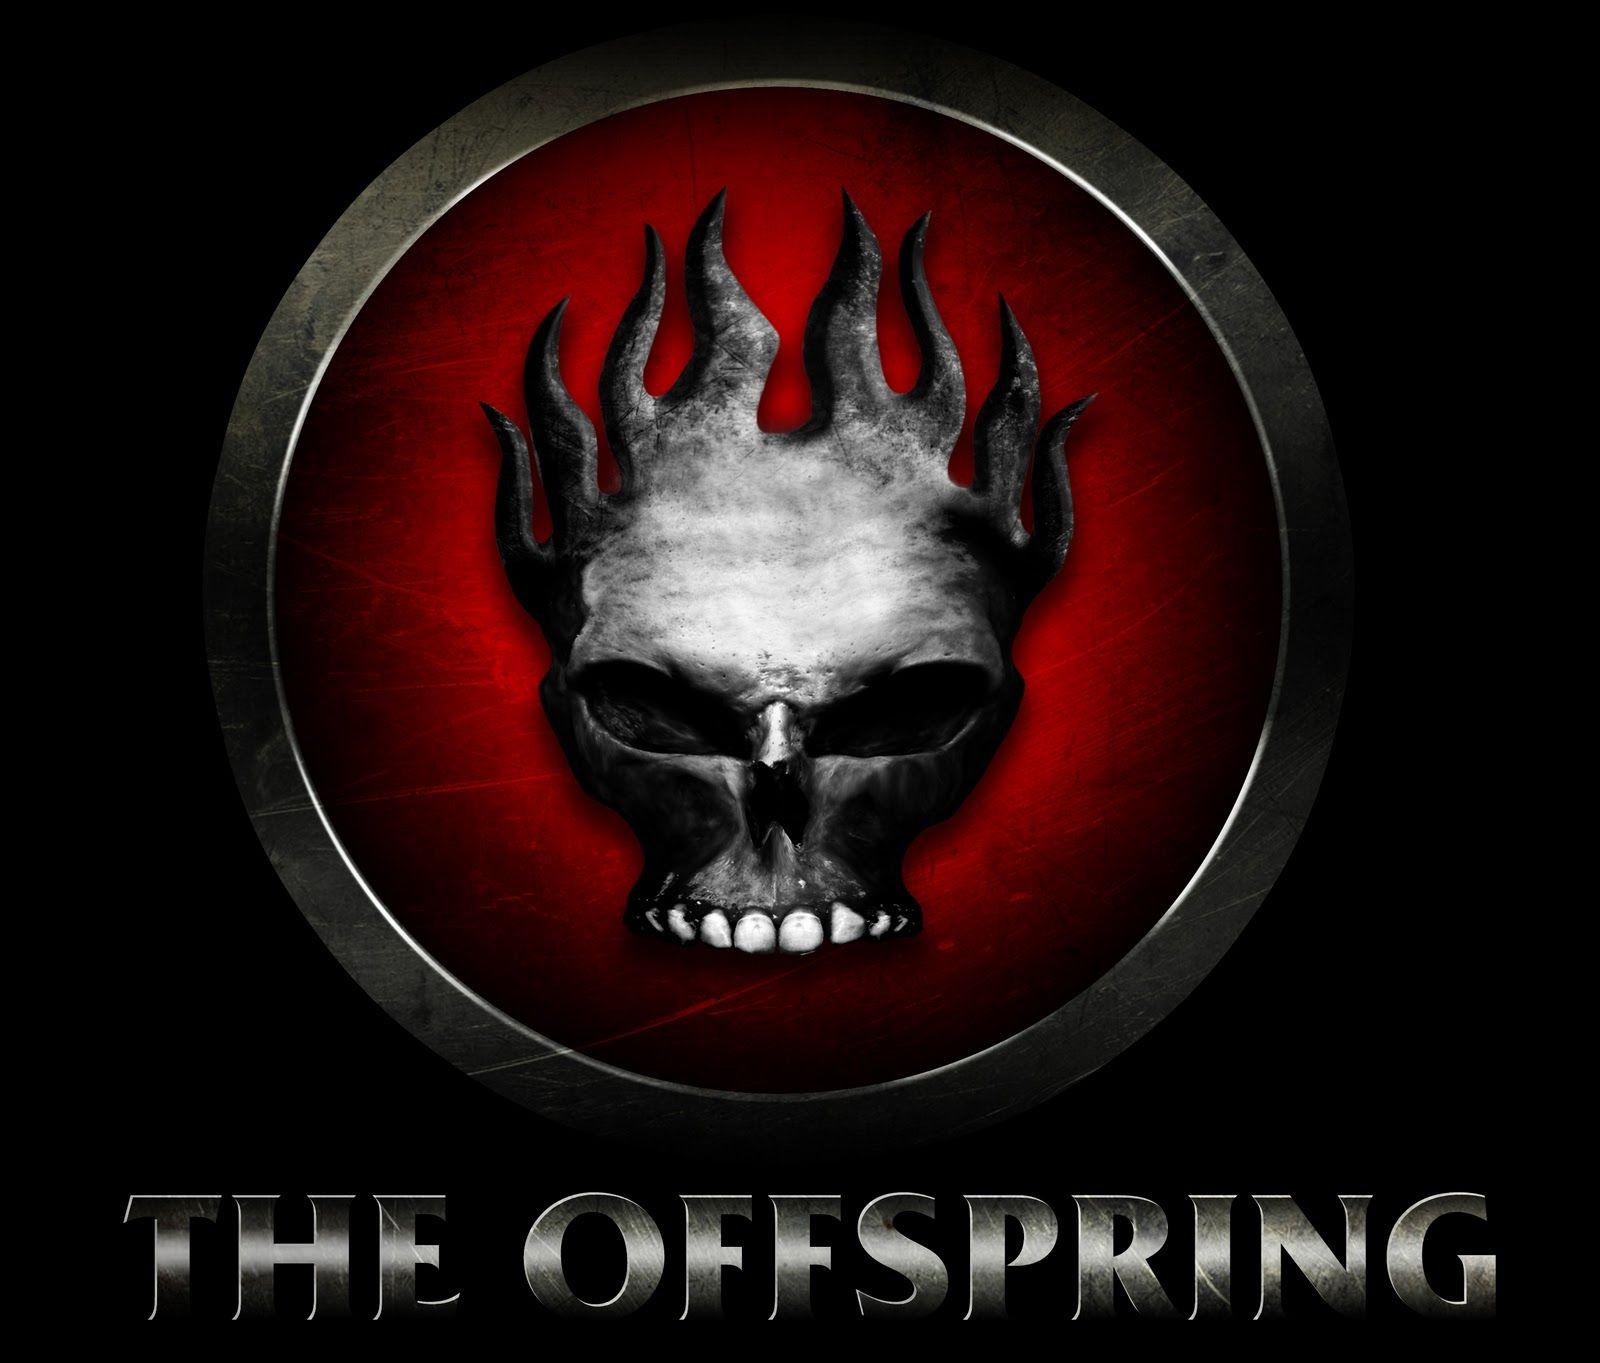 Offspring Logo - Gallery 91 Inc.: The Offspring's Conspiracy of One logo: In 3D